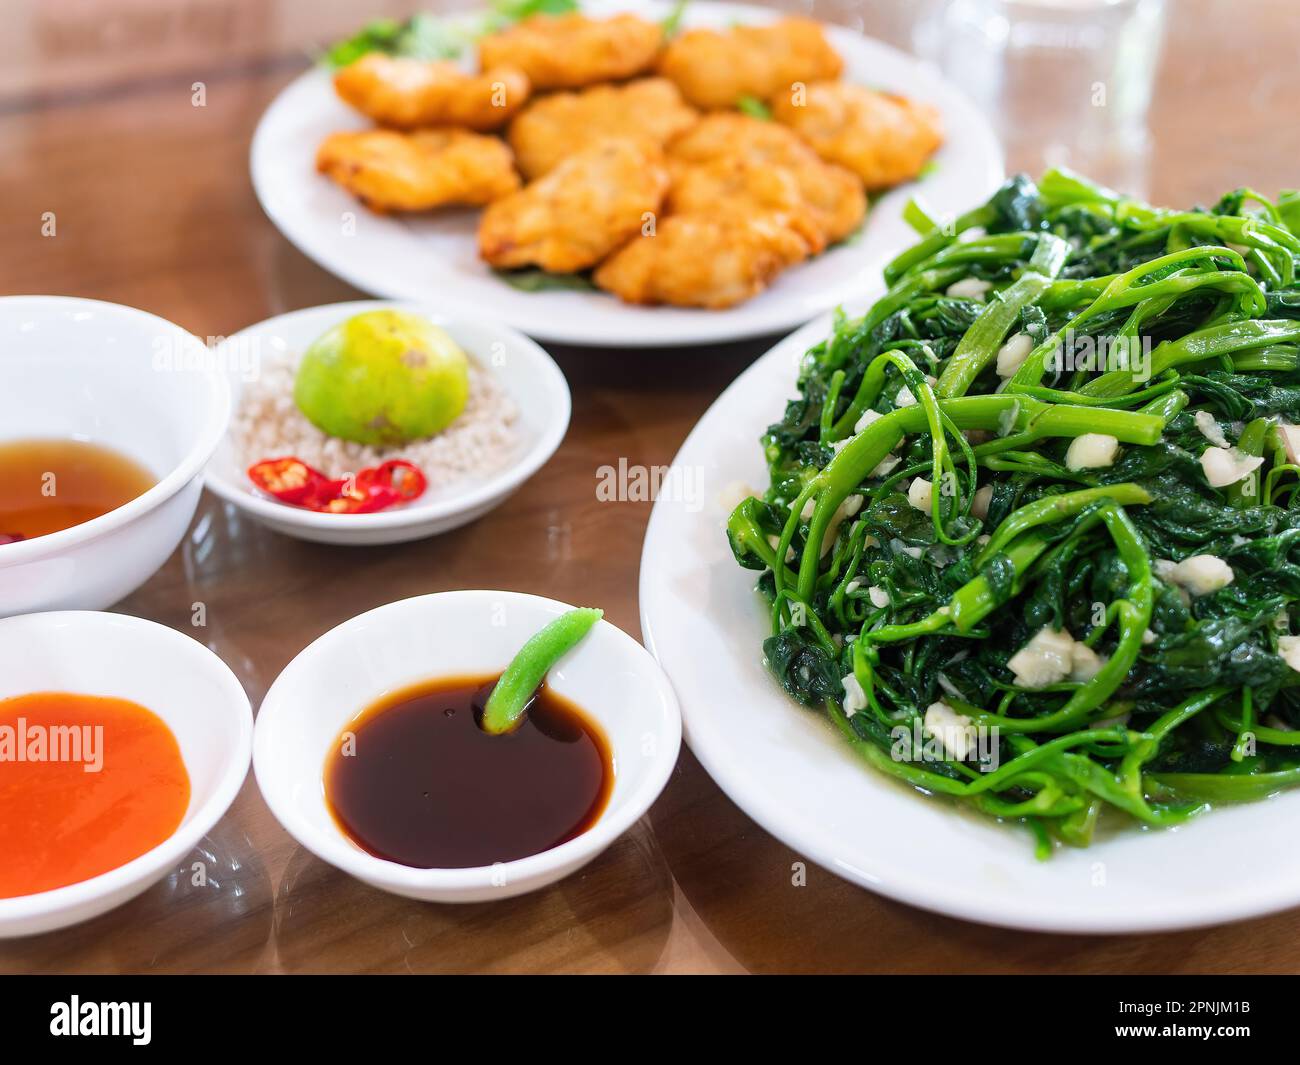 Vietnamese fried morning glory, rau muong xao toi, and Vietnamese fish cakes, cha ca quy nhon, out of focus in the background. Fried morning glory is Stock Photo